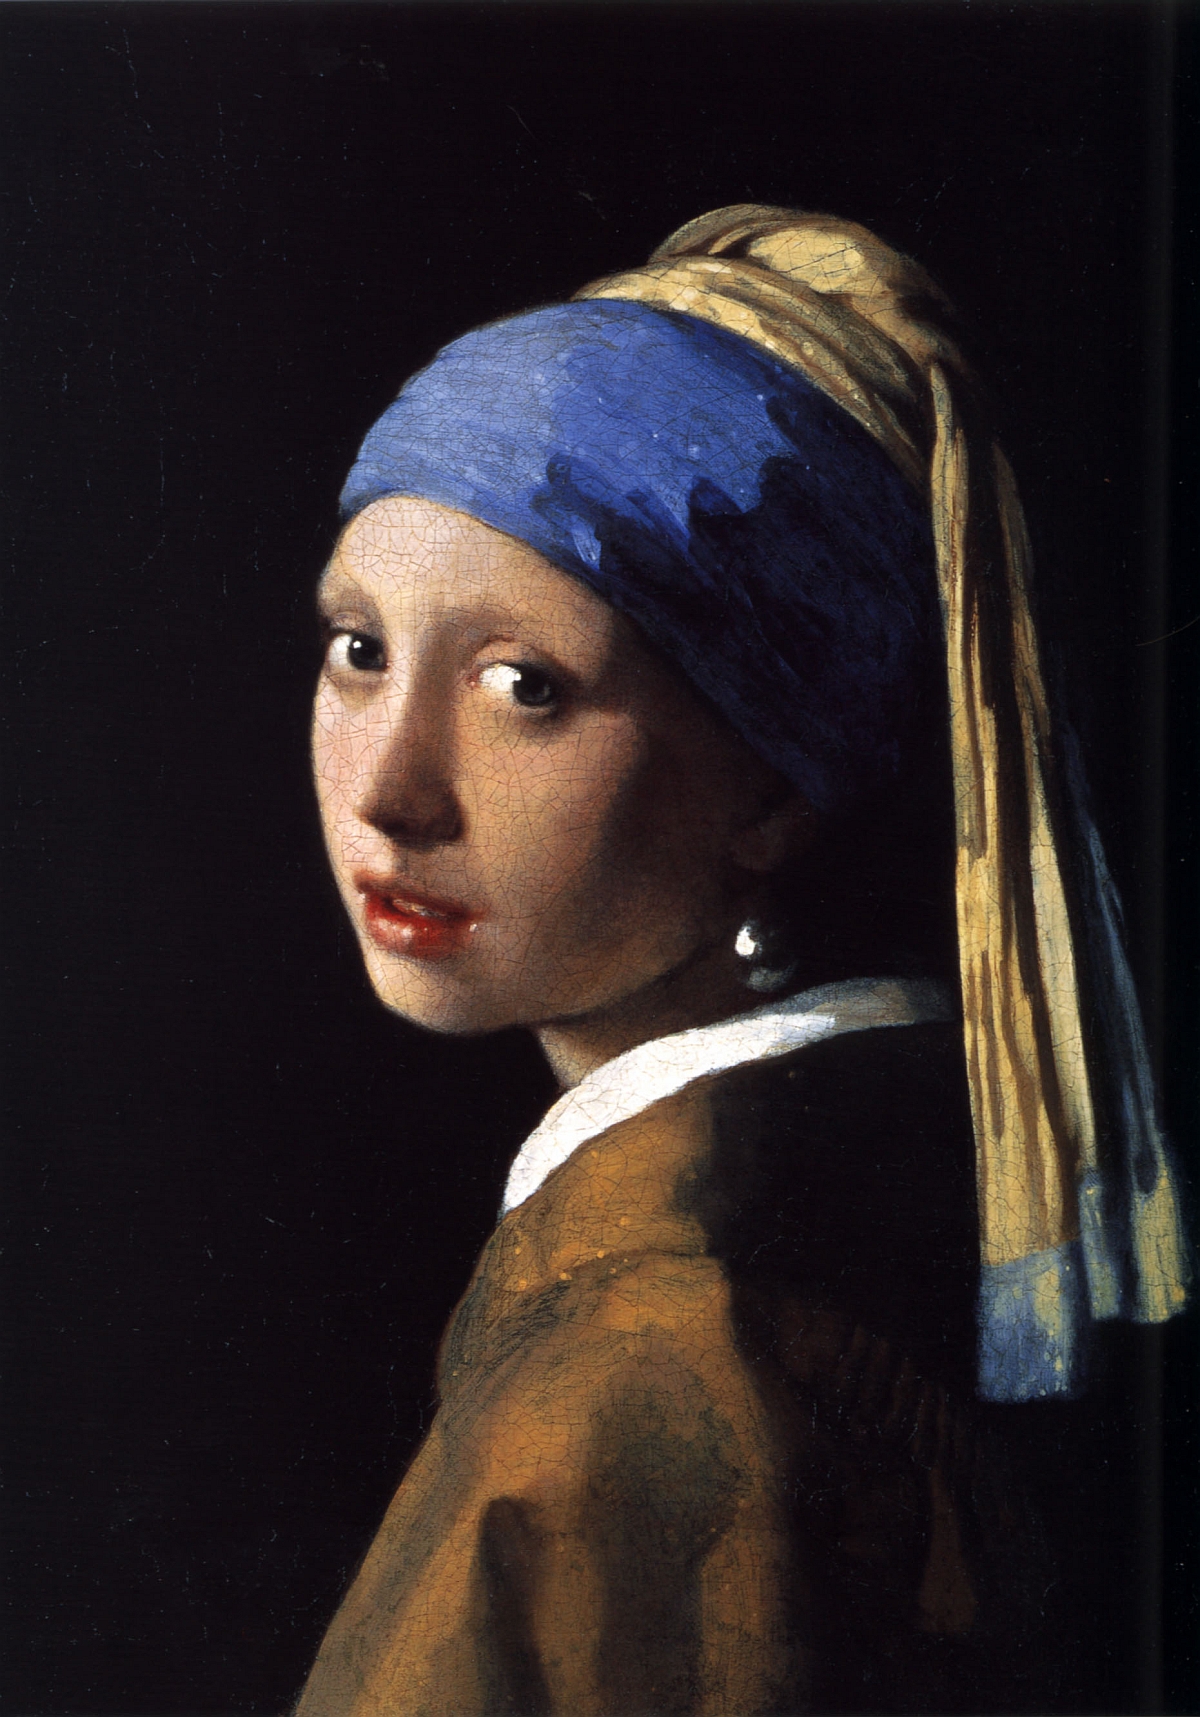 1675: Who painted the “Girl with a Pearl Earring”?